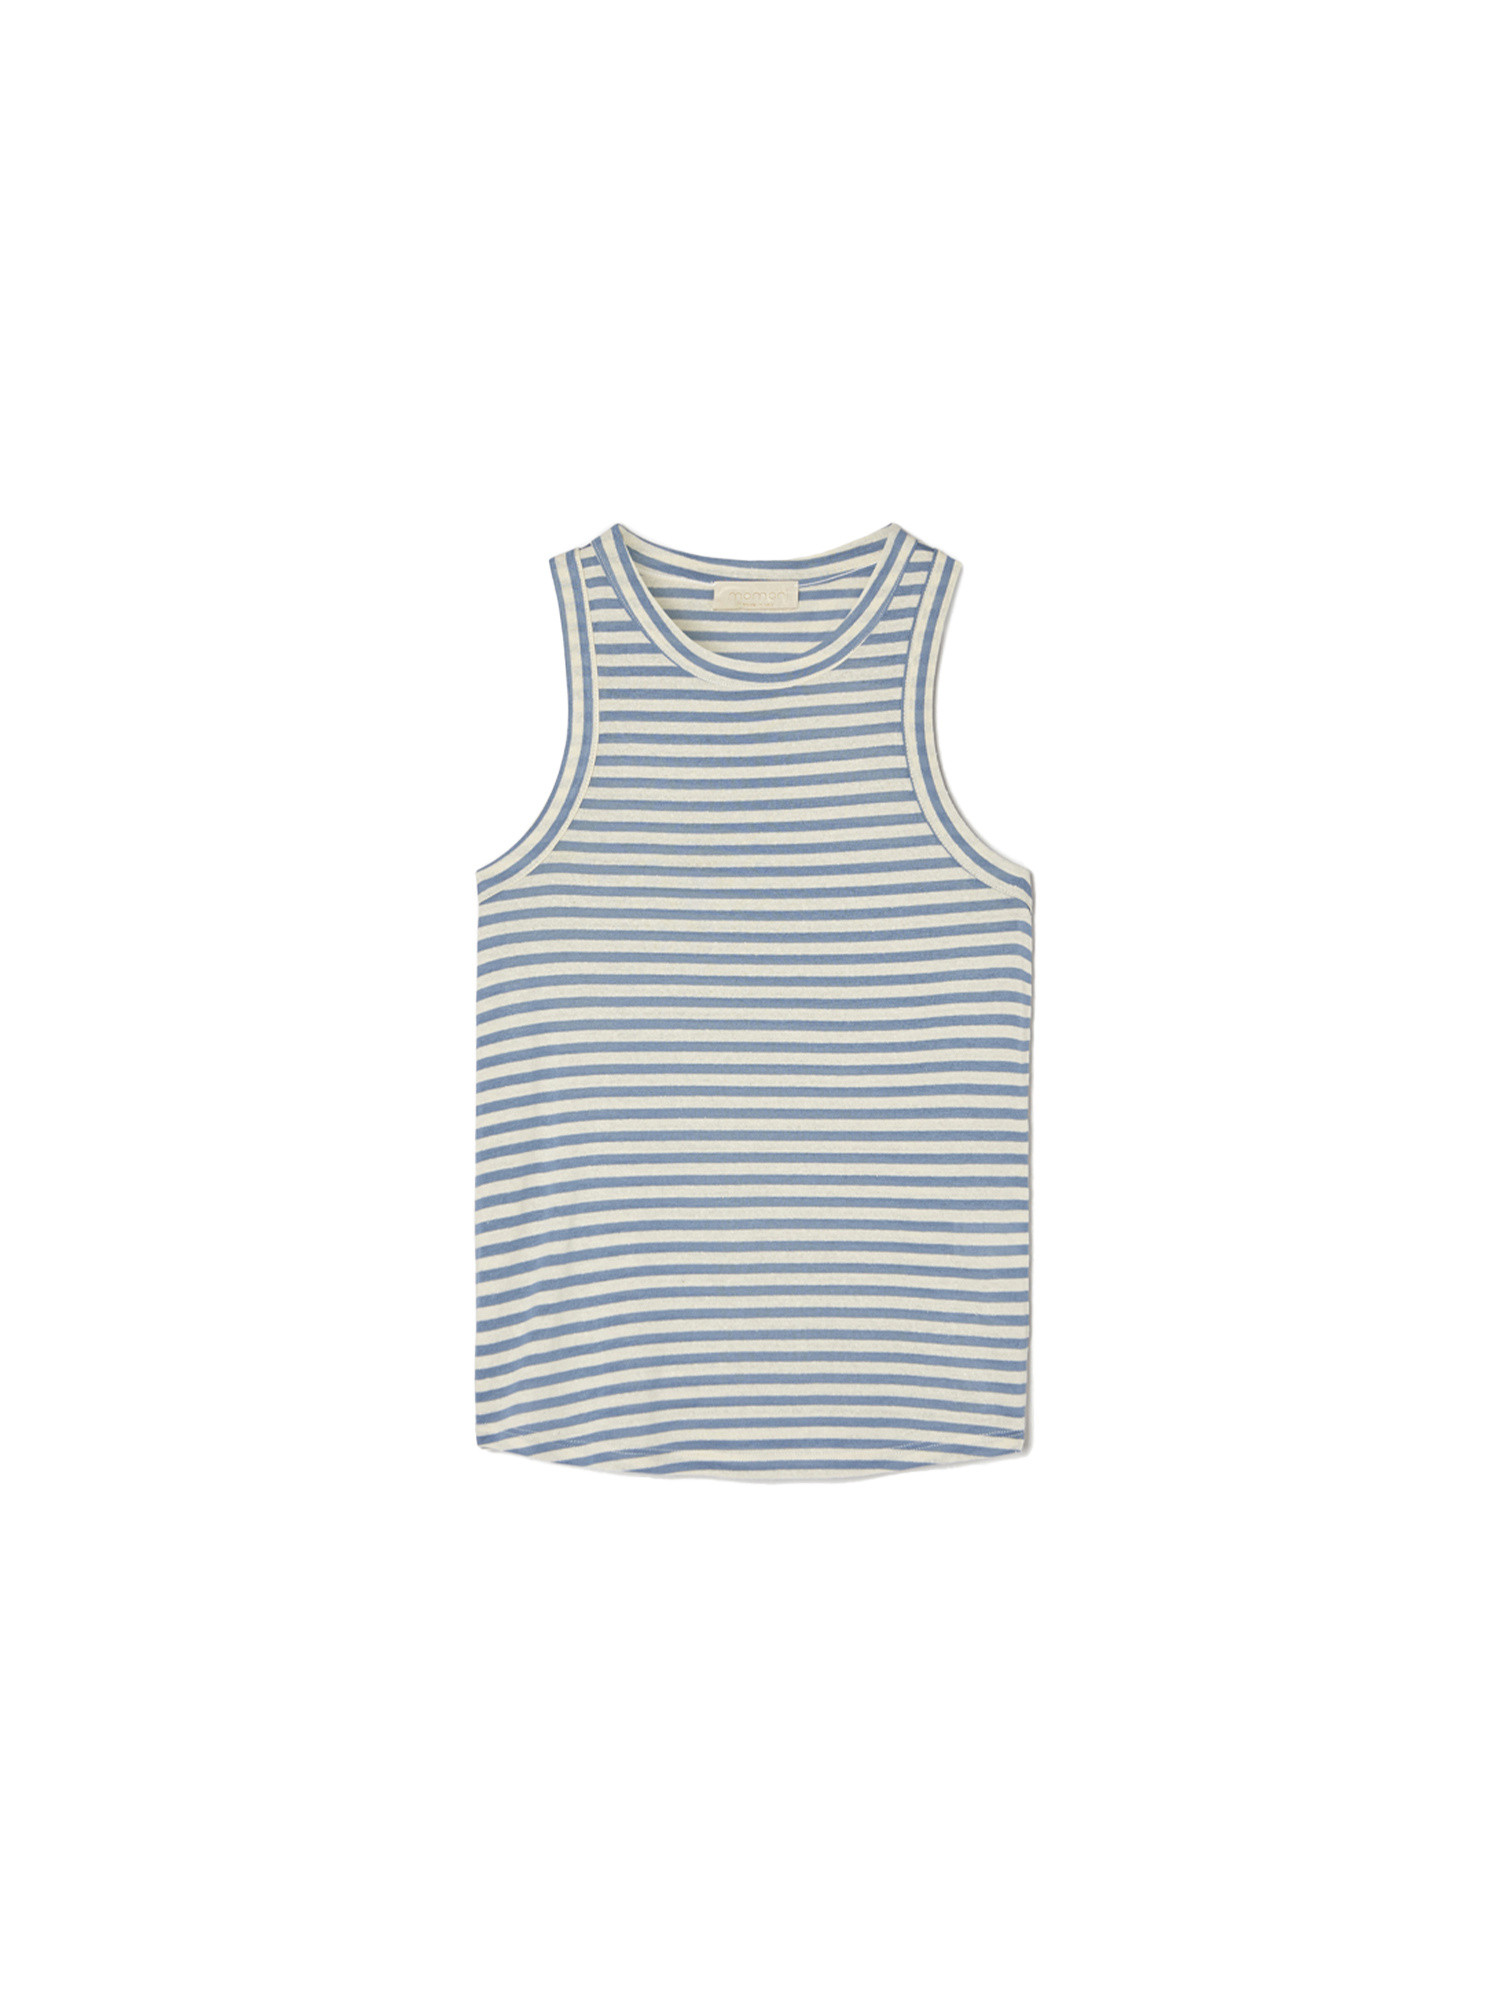 Momonì - Rue top in striped silk jersey, White Cream, large image number 0